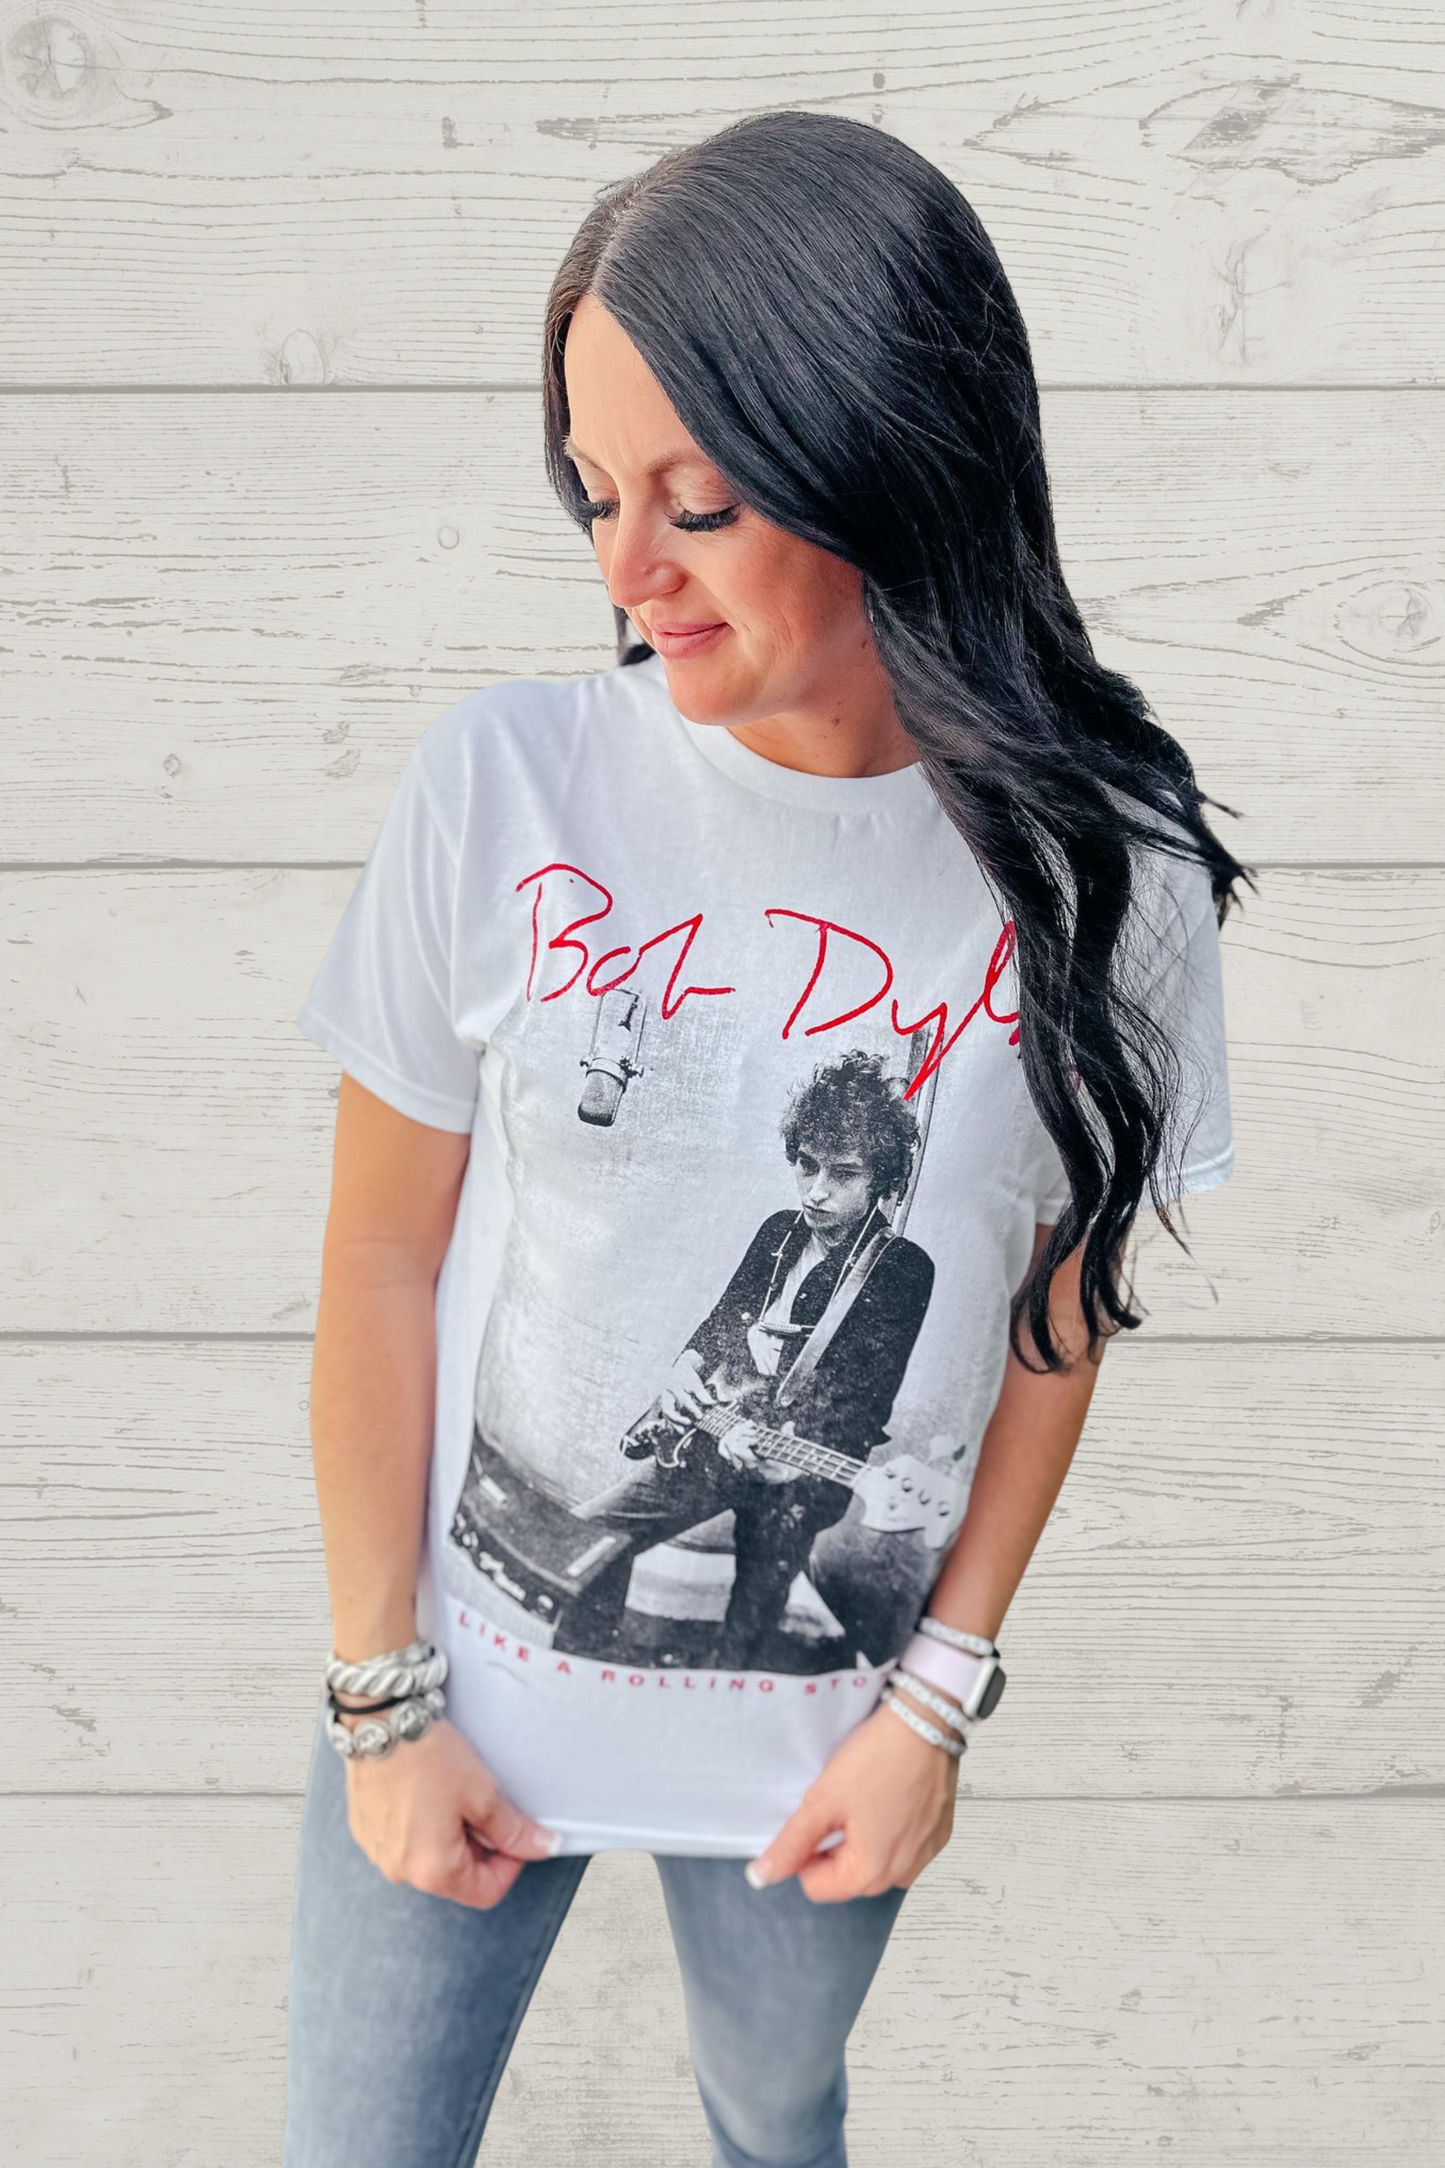 Bob Dylan Rolling Stones Band Tee